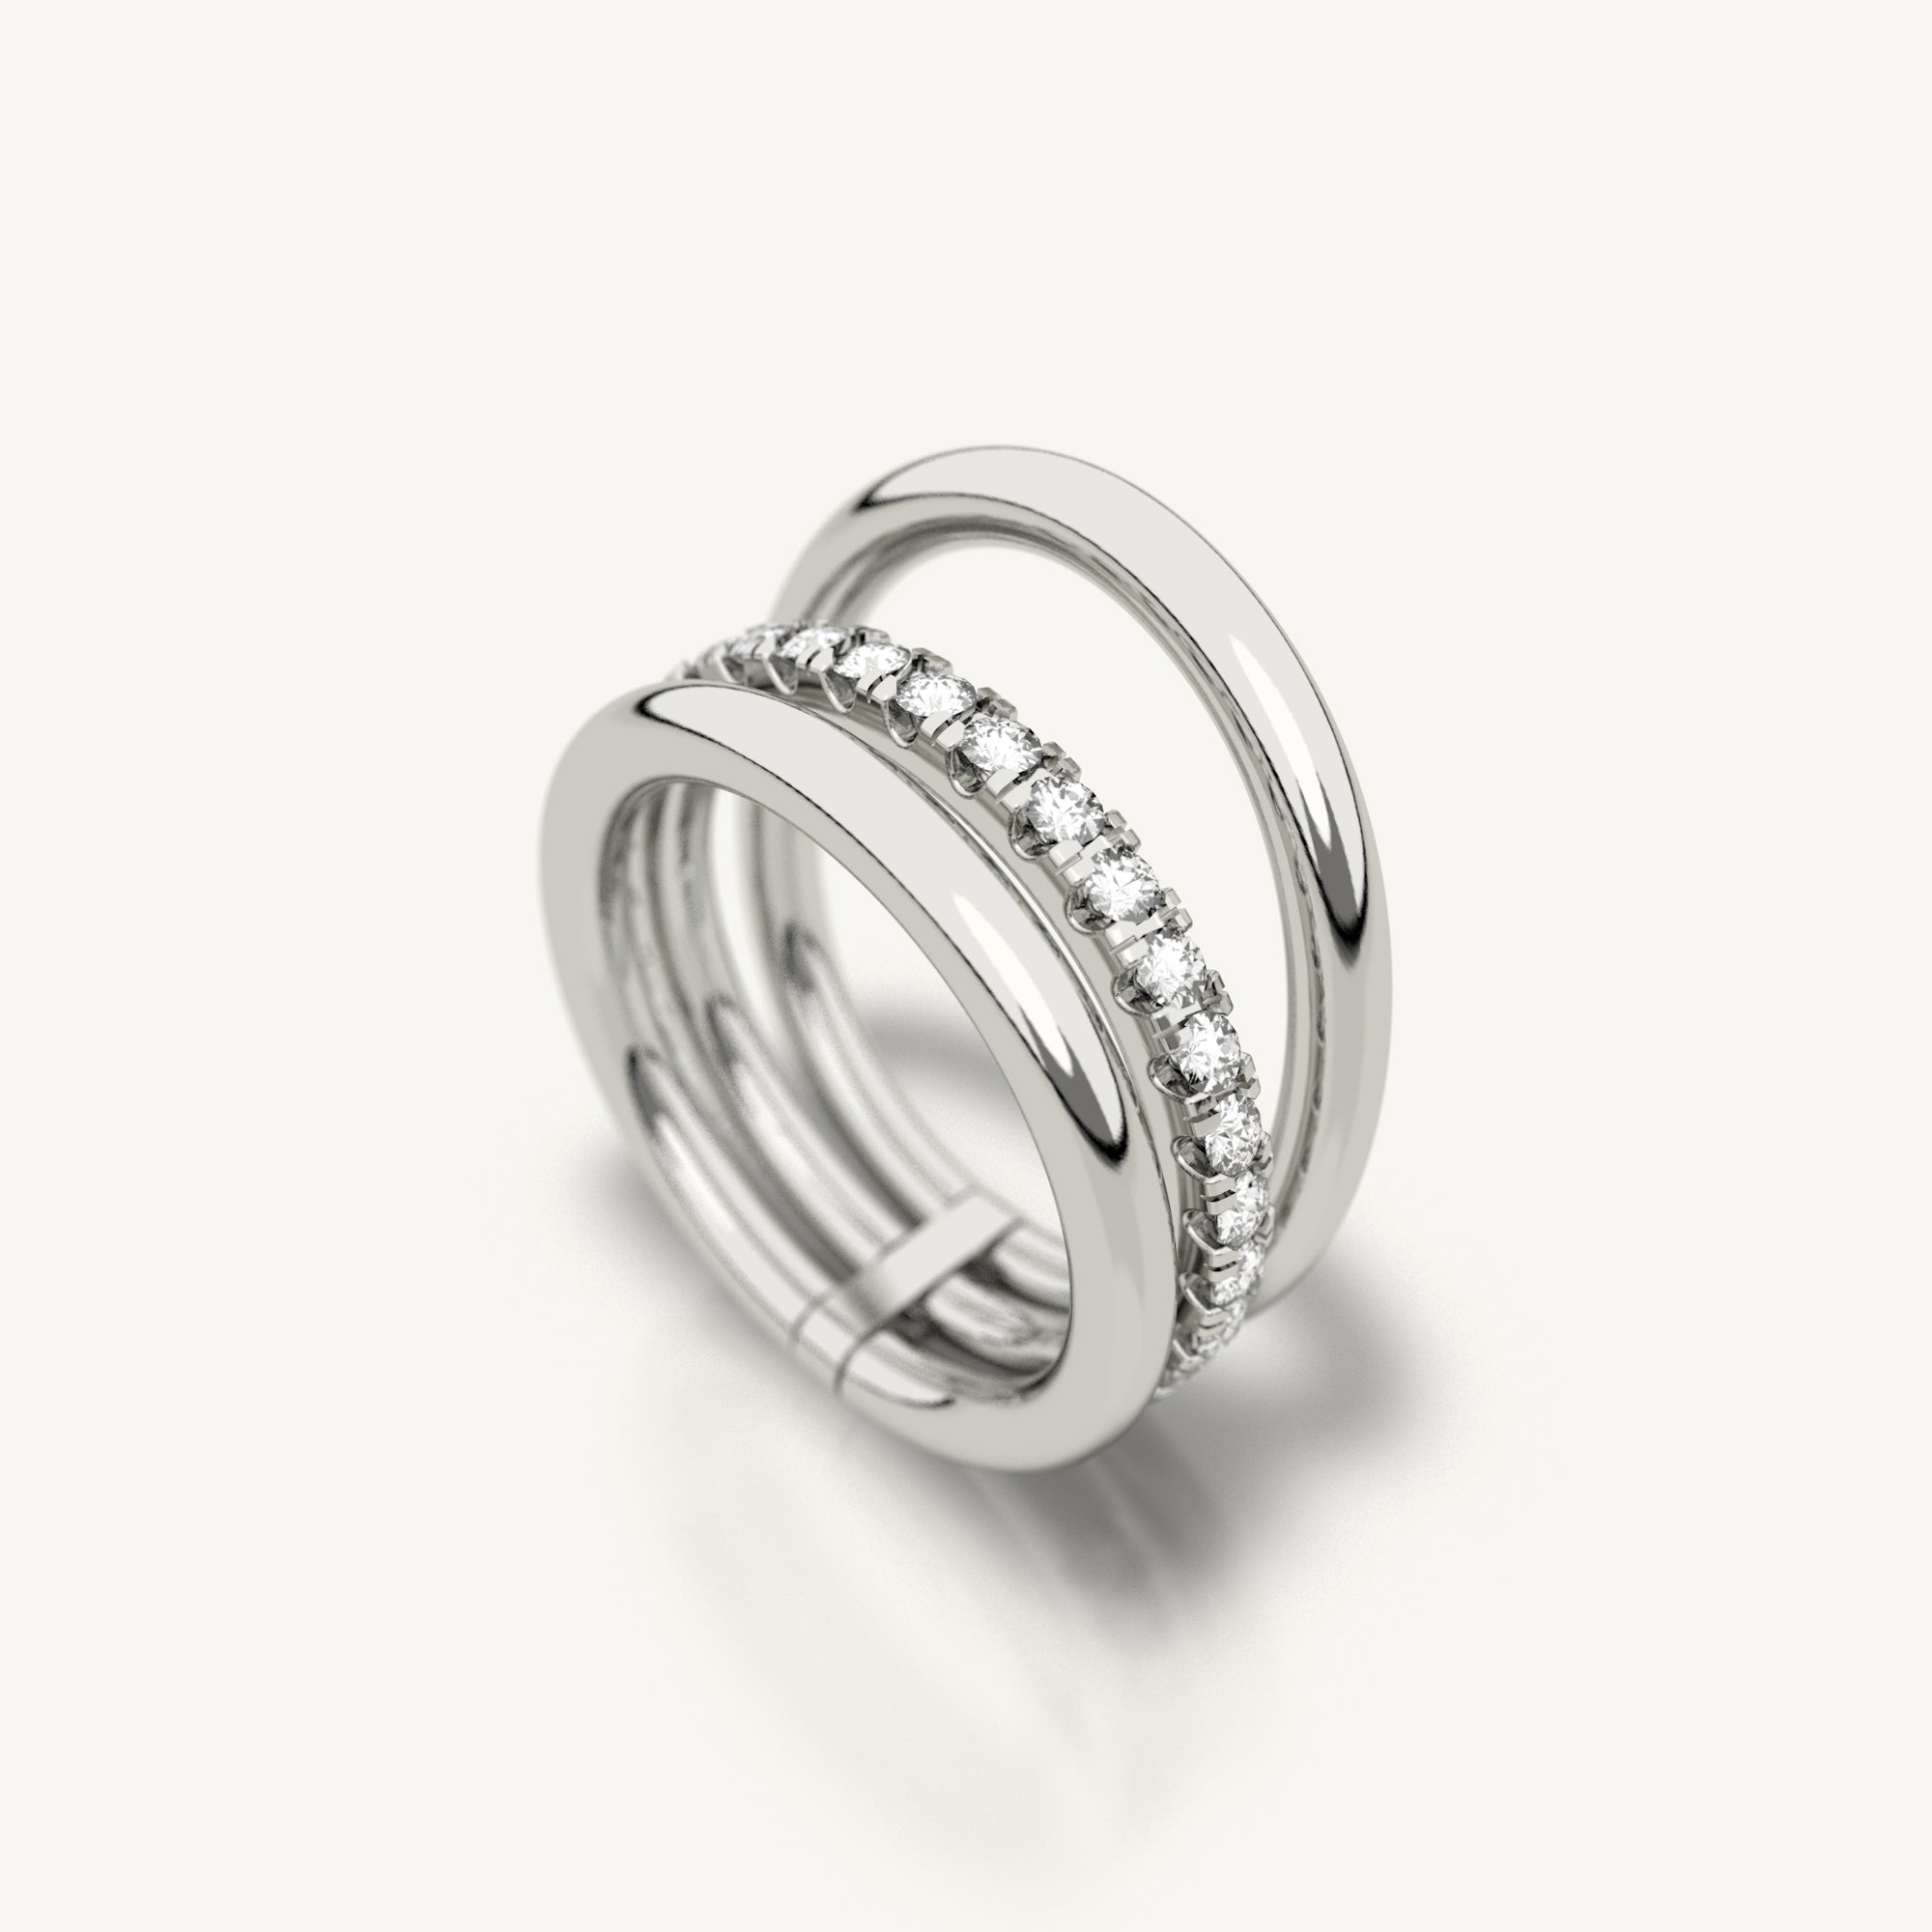 Trio ring from Inacio made from 18k recycled white gold and lab grown diamonds